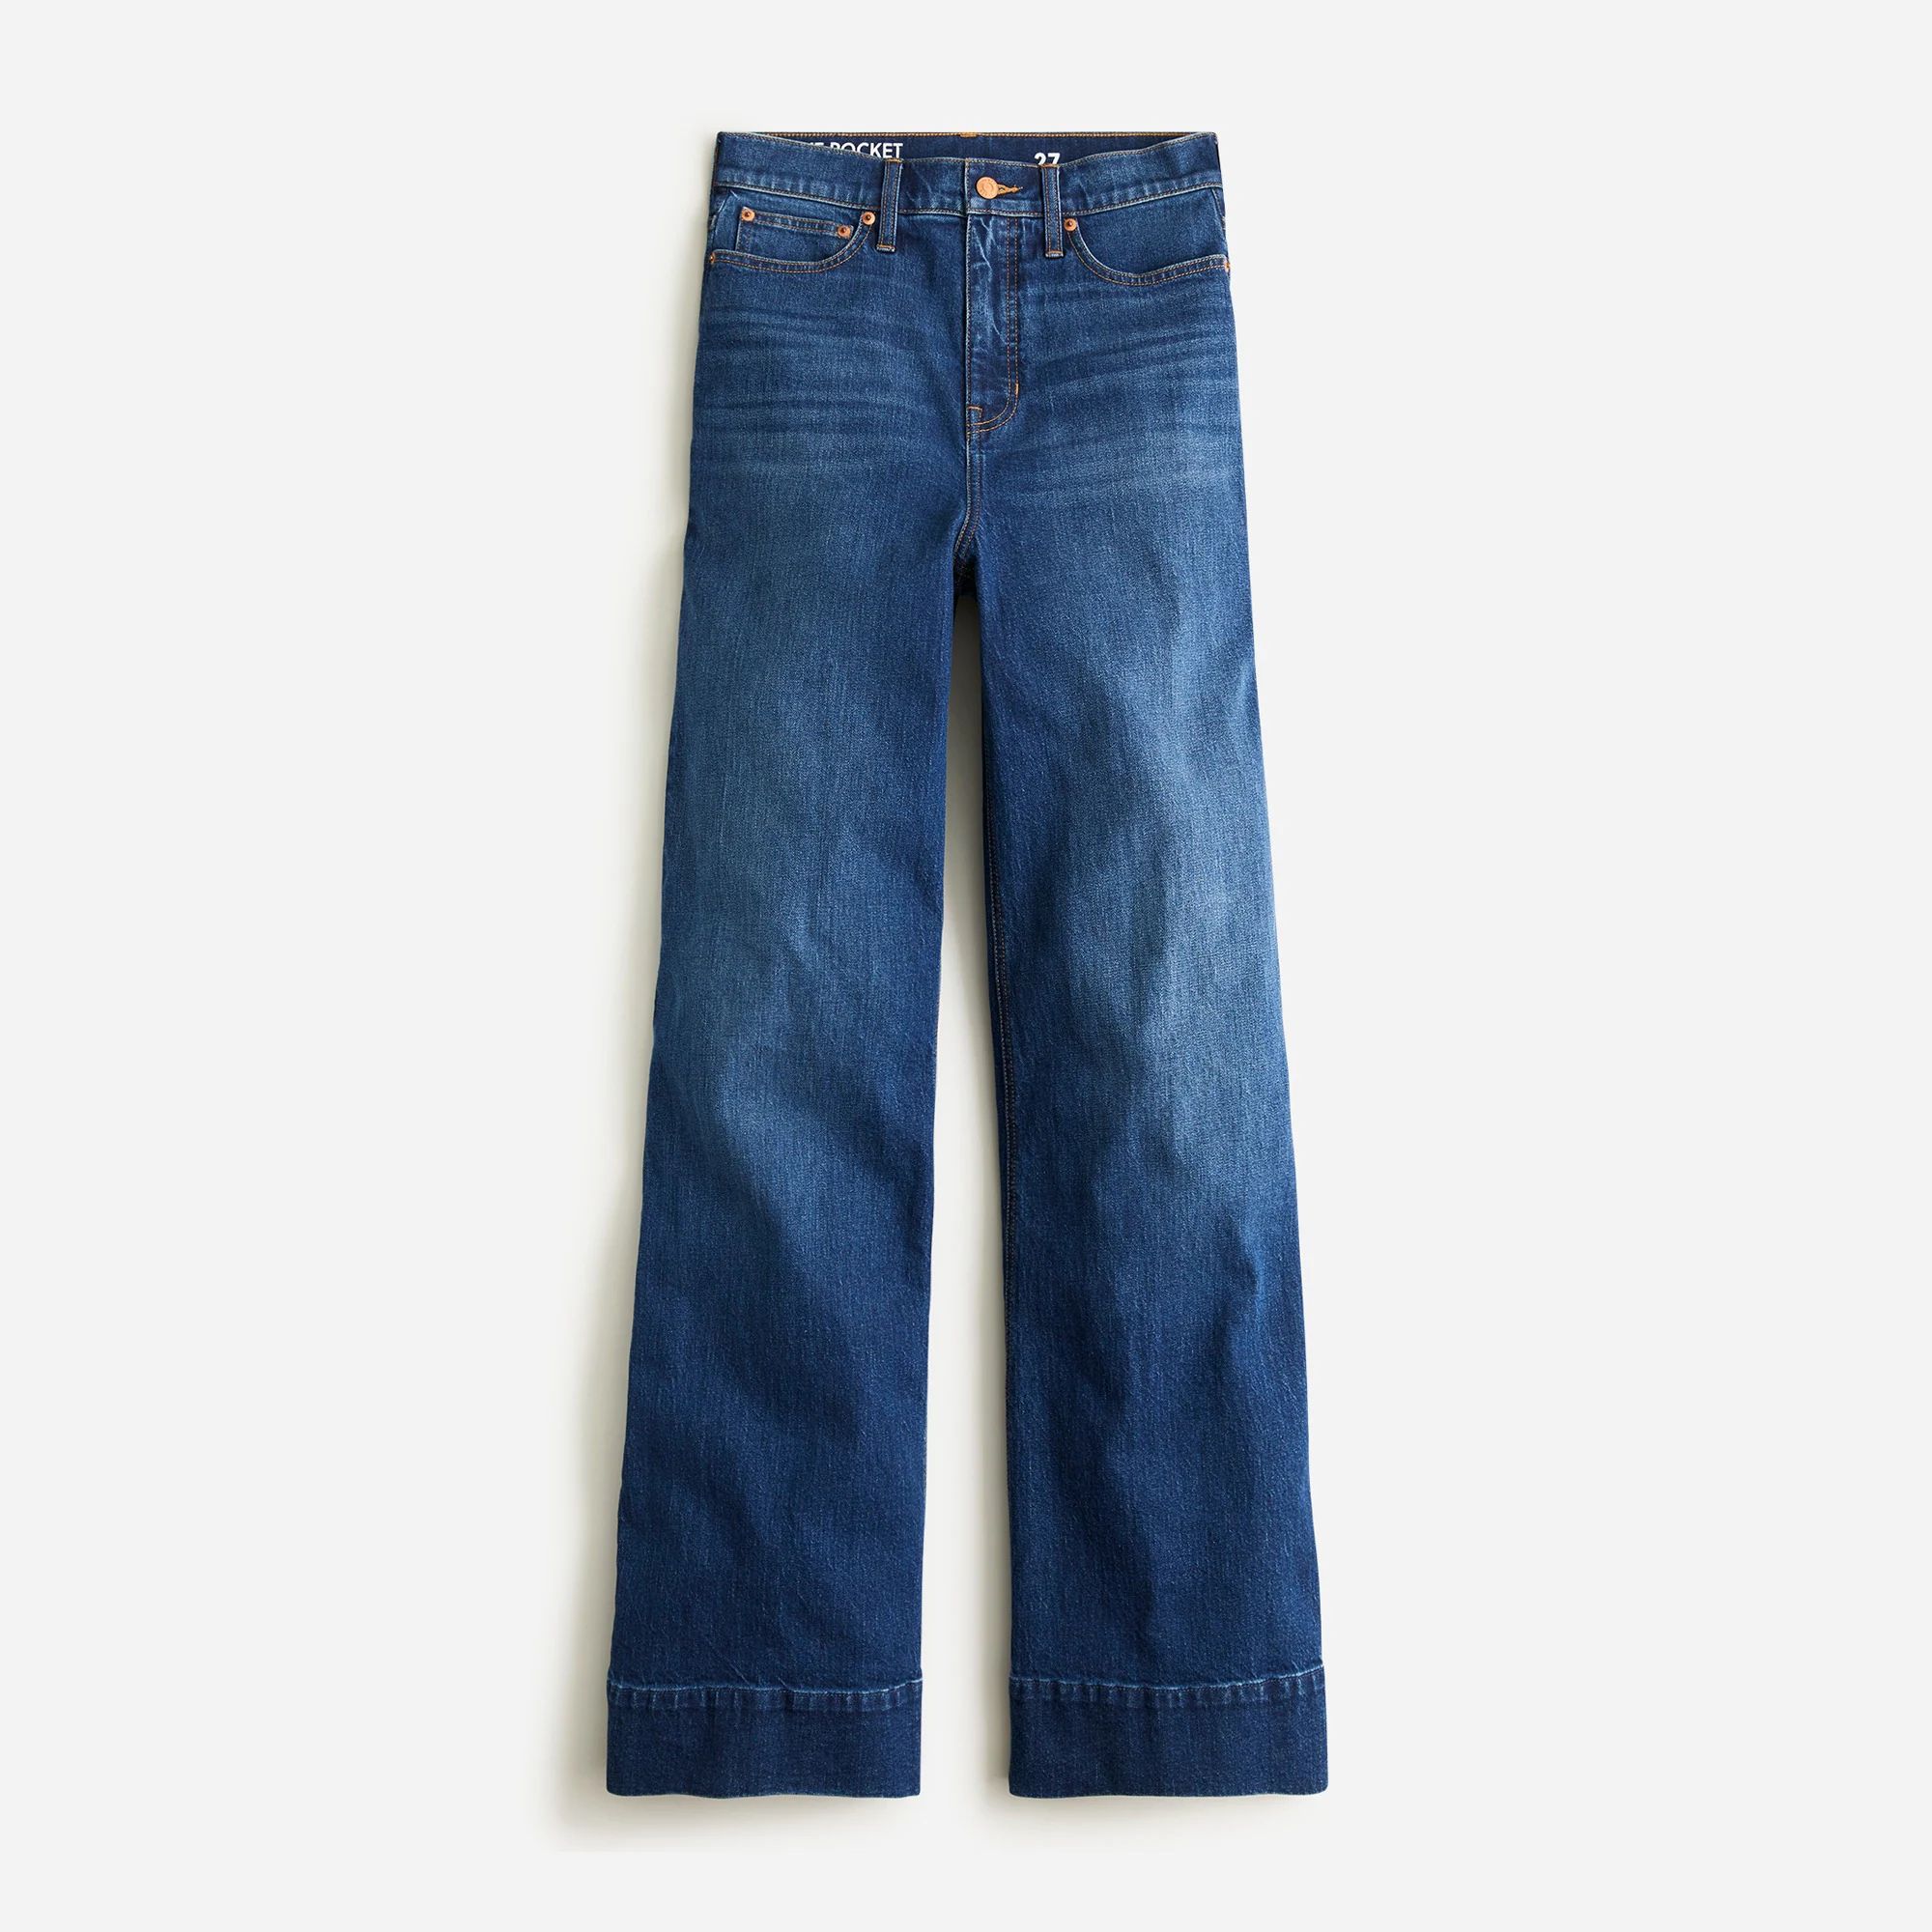 Tall denim trouser in Wesly wash | J.Crew US